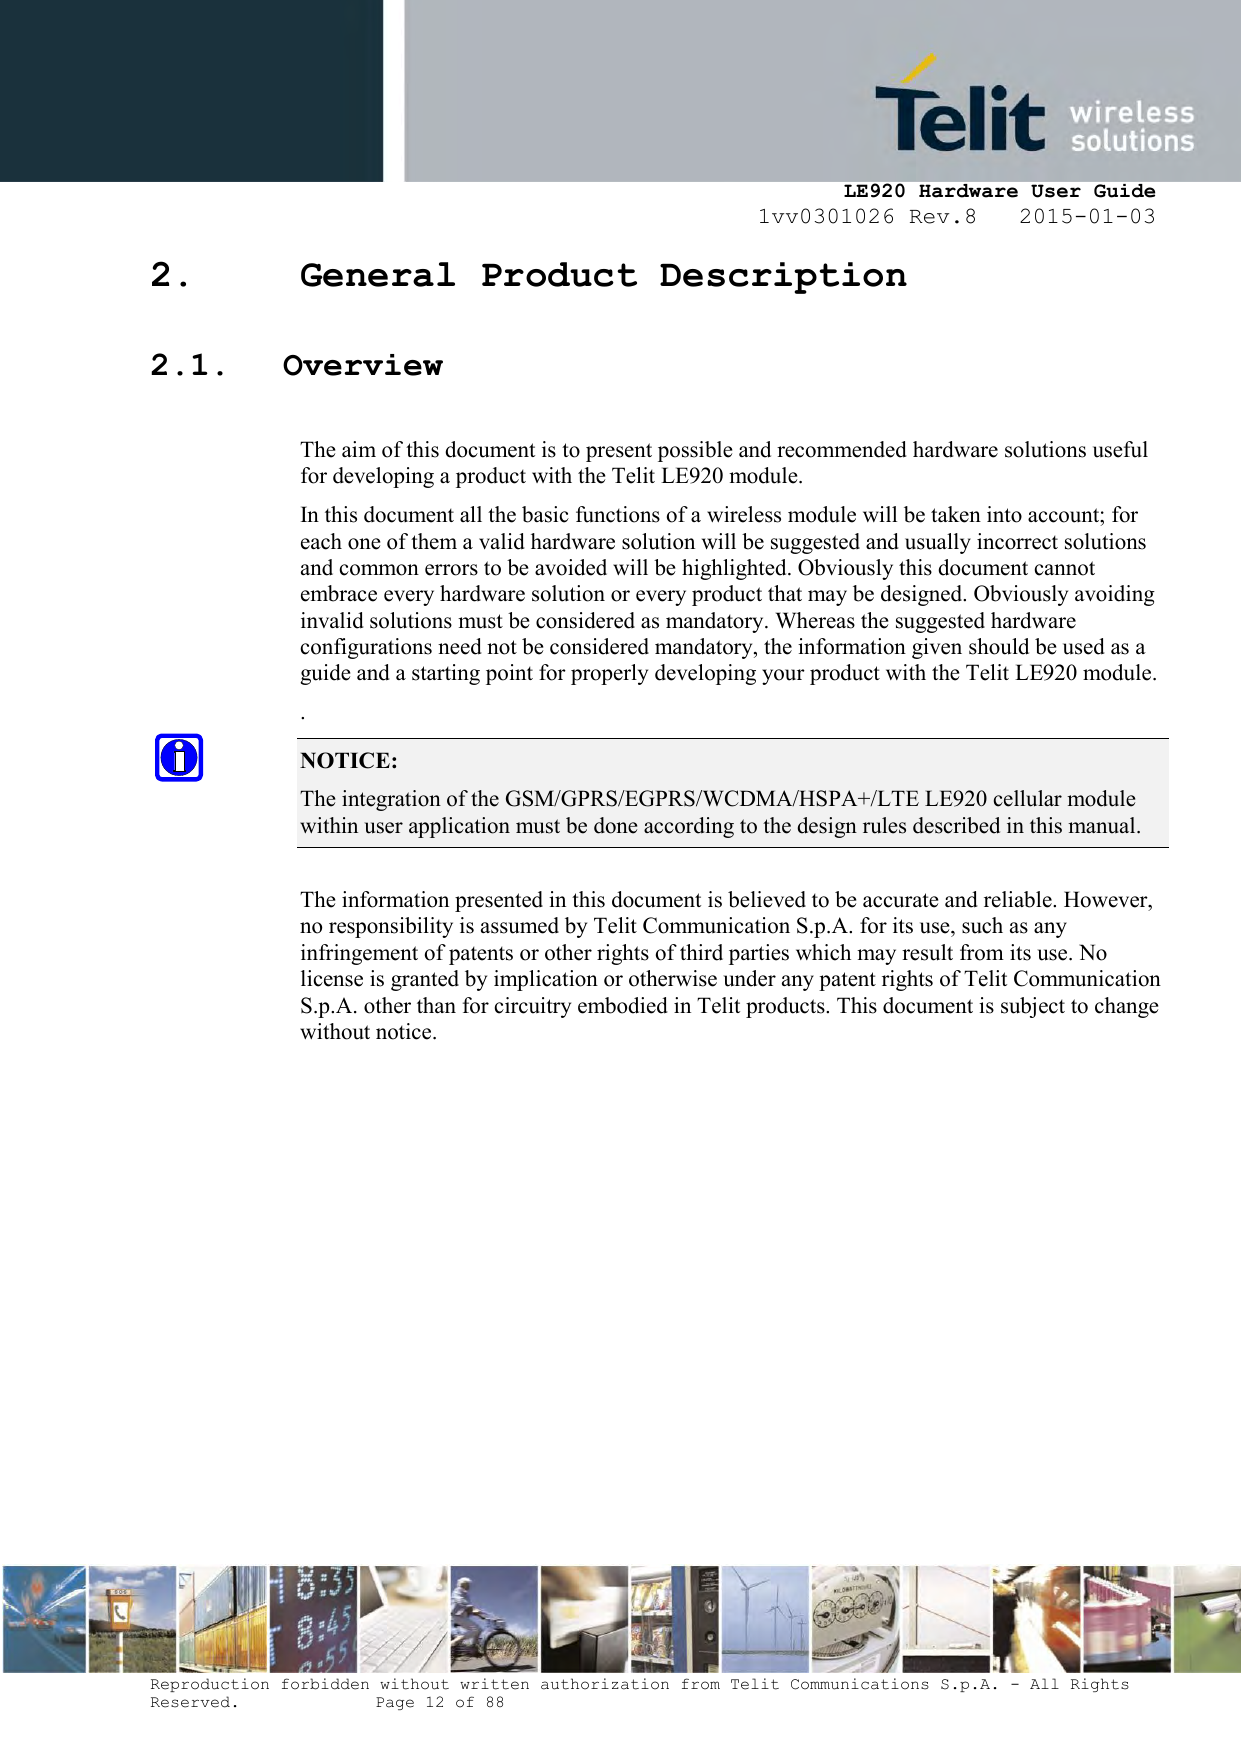     LE920 Hardware User Guide 1vv0301026 Rev.8   2015-01-03 Reproduction forbidden without written authorization from Telit Communications S.p.A. - All Rights Reserved.    Page 12 of 88  2. General Product Description 2.1. Overview  The aim of this document is to present possible and recommended hardware solutions useful for developing a product with the Telit LE920 module. In this document all the basic functions of a wireless module will be taken into account; for each one of them a valid hardware solution will be suggested and usually incorrect solutions and common errors to be avoided will be highlighted. Obviously this document cannot embrace every hardware solution or every product that may be designed. Obviously avoiding invalid solutions must be considered as mandatory. Whereas the suggested hardware configurations need not be considered mandatory, the information given should be used as a guide and a starting point for properly developing your product with the Telit LE920 module. . NOTICE: The integration of the GSM/GPRS/EGPRS/WCDMA/HSPA+/LTE LE920 cellular module within user application must be done according to the design rules described in this manual.     The information presented in this document is believed to be accurate and reliable. However, no responsibility is assumed by Telit Communication S.p.A. for its use, such as any infringement of patents or other rights of third parties which may result from its use. No license is granted by implication or otherwise under any patent rights of Telit Communication S.p.A. other than for circuitry embodied in Telit products. This document is subject to change without notice.     